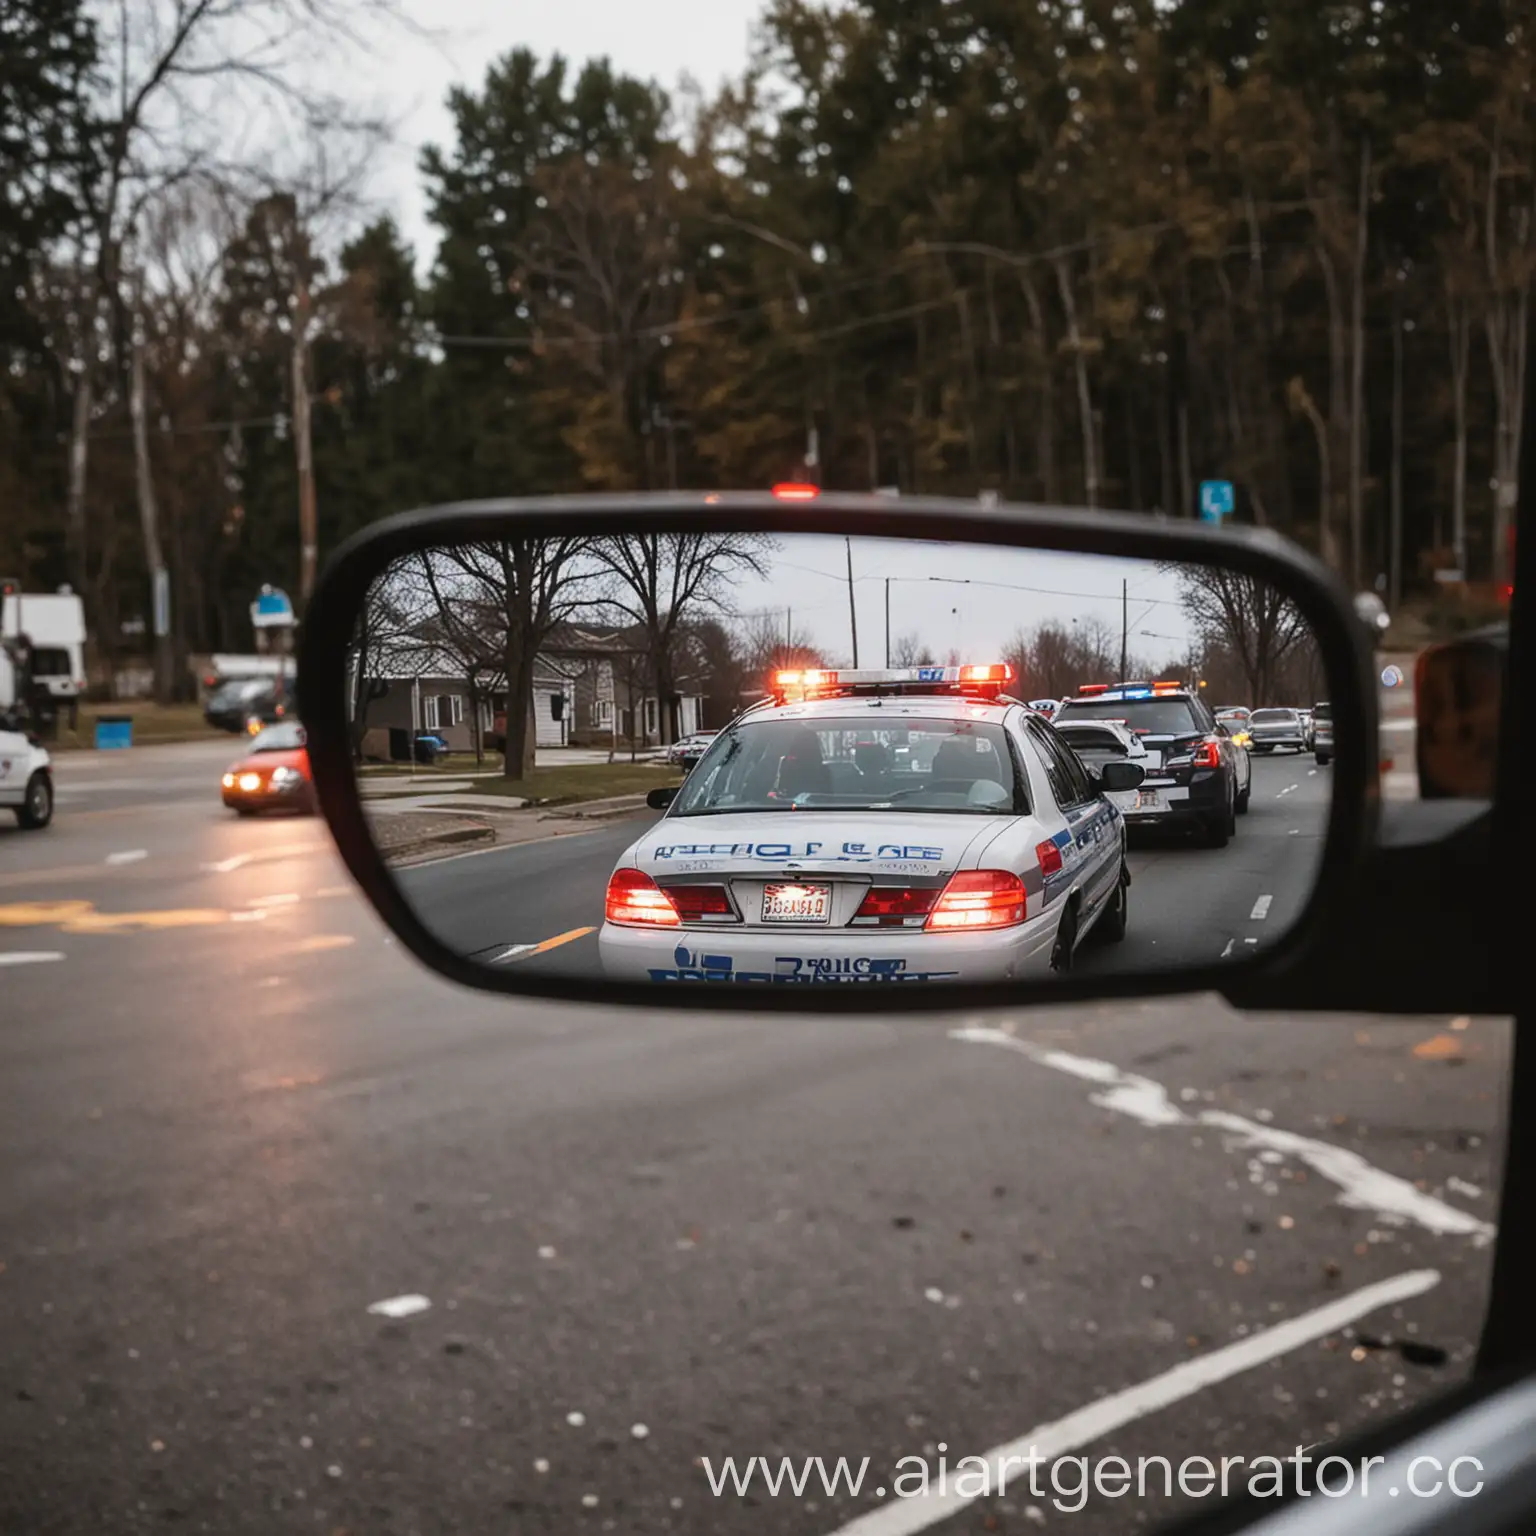 A police car with flashing lights is visible in the rearview mirror